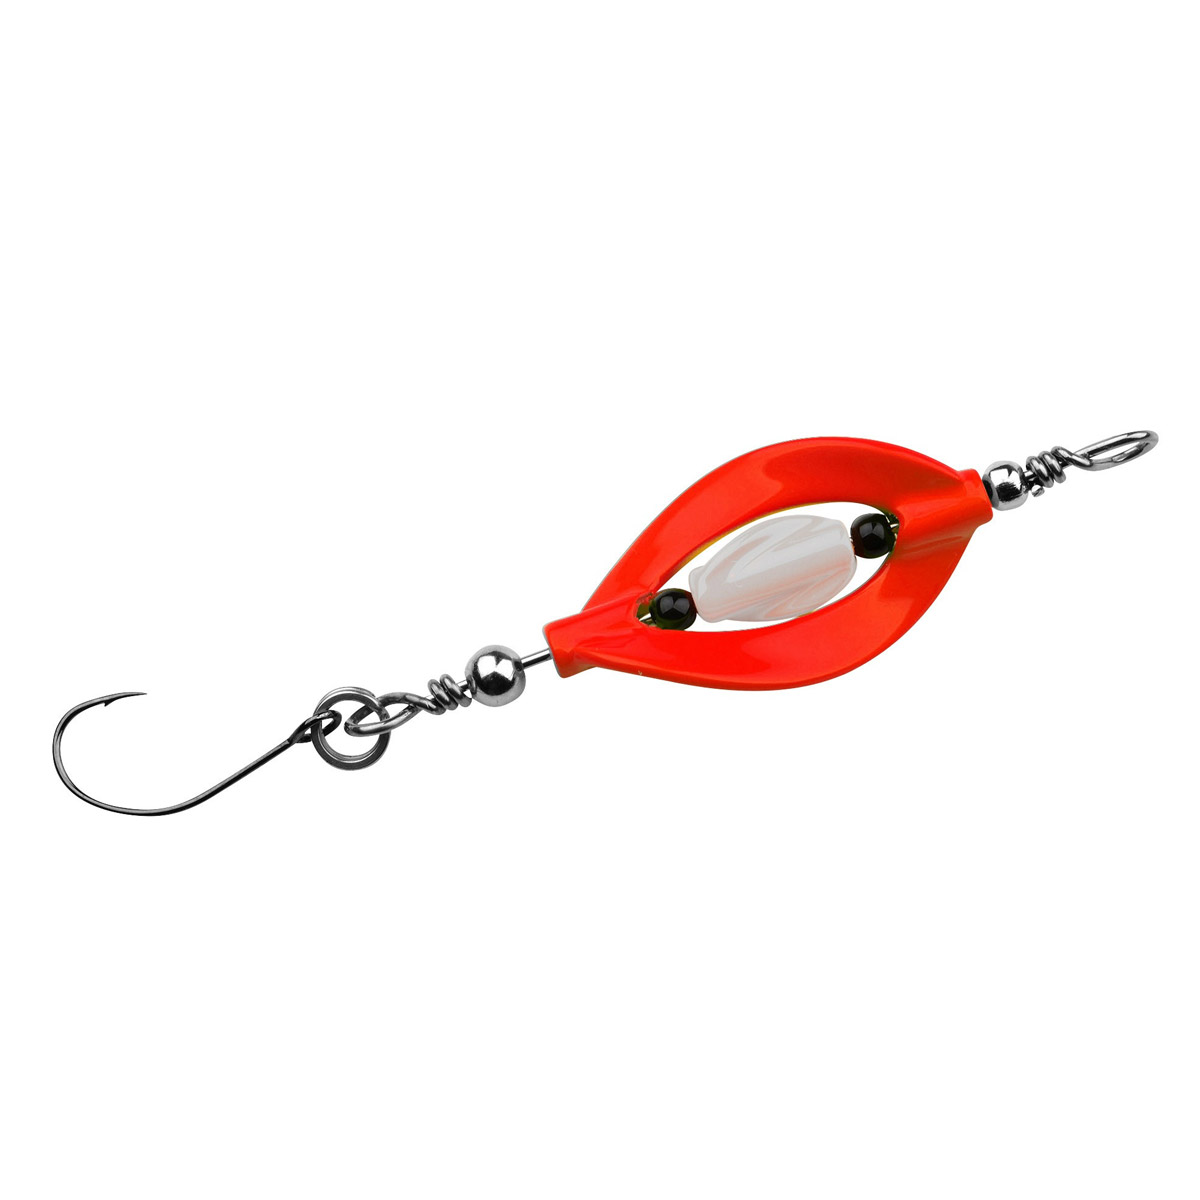 Spro Trout Master Incy Double Spin Spoon -  Devilish